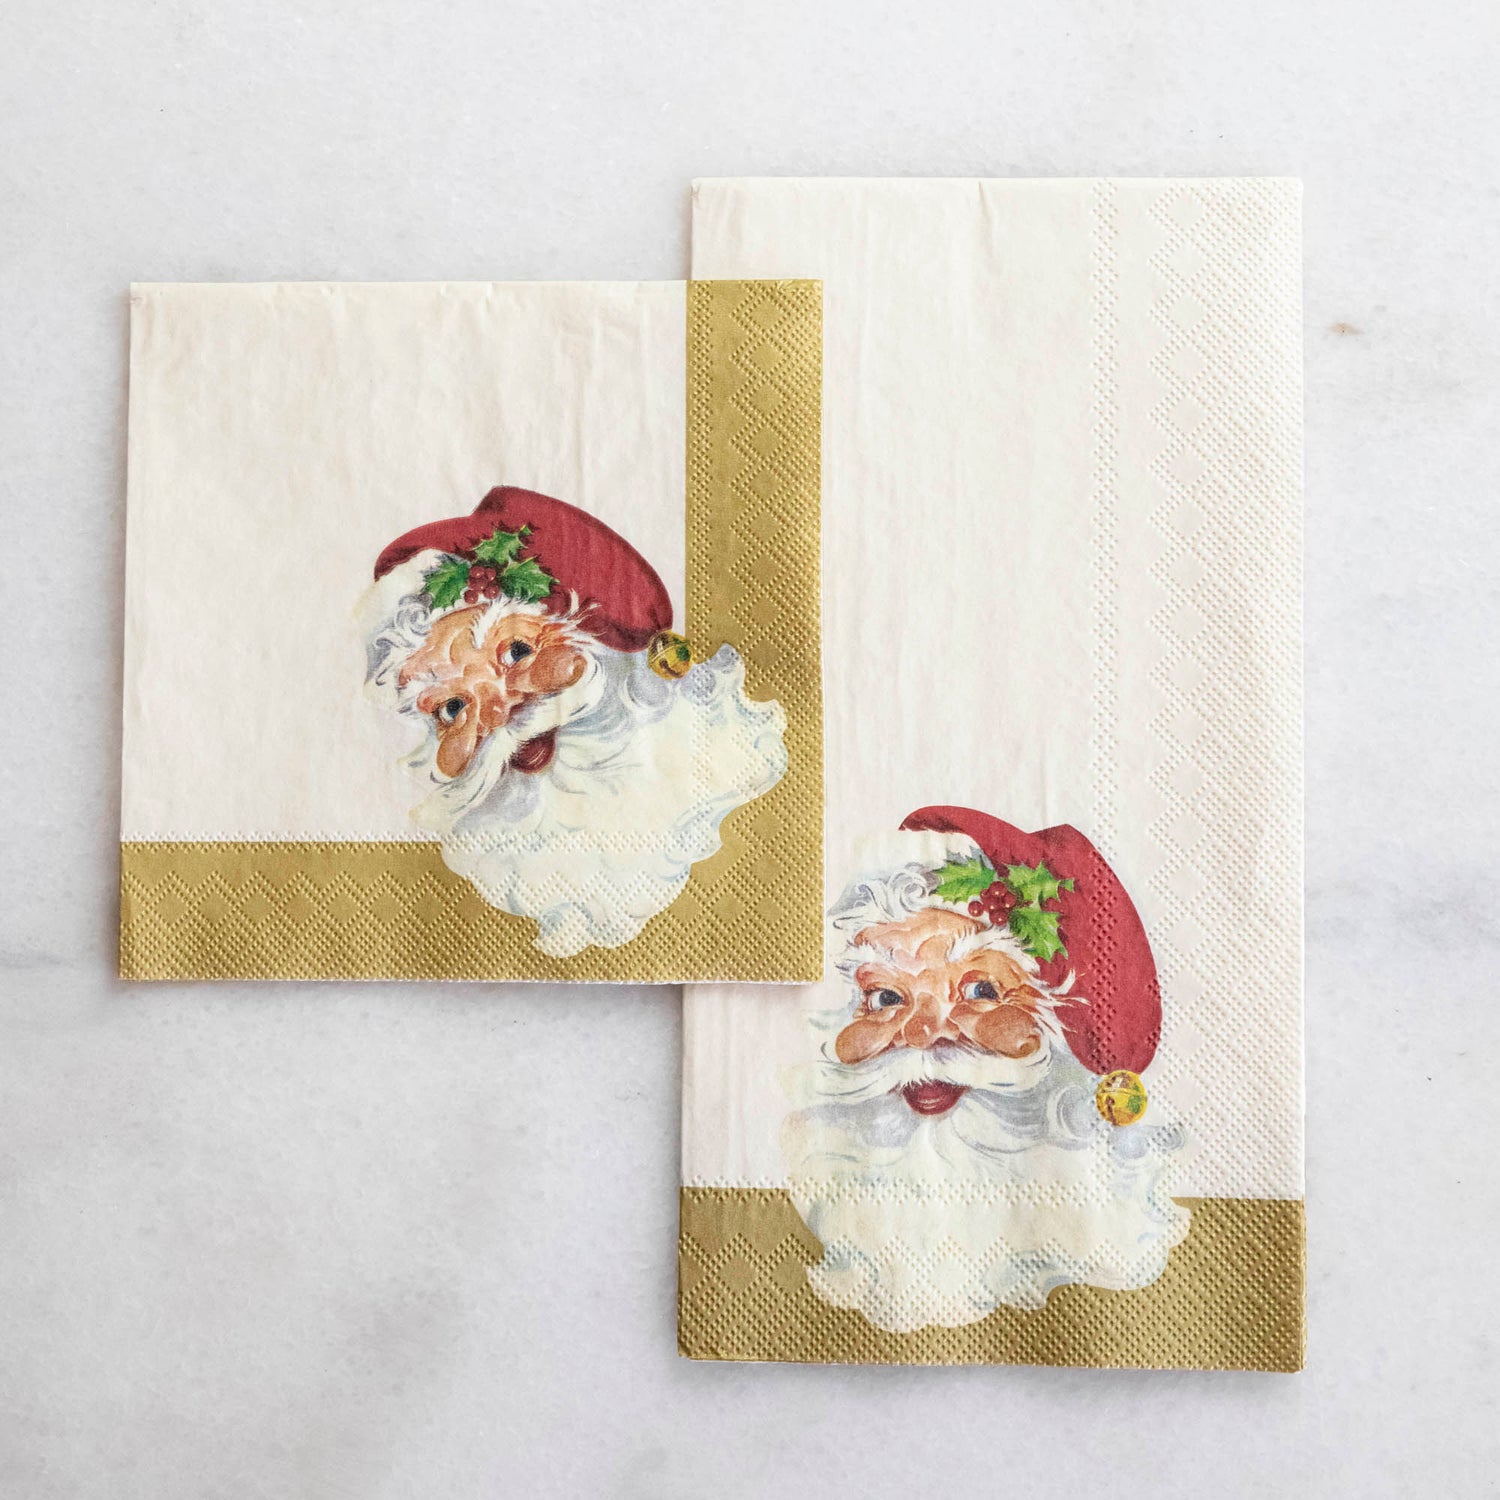 Introducing our festive Hester &amp; Cook Santa Napkins, the perfect addition to your table setting this holiday season! These napkins are designed to bring holiday cheer to your dining experience, making them an essential part of any.